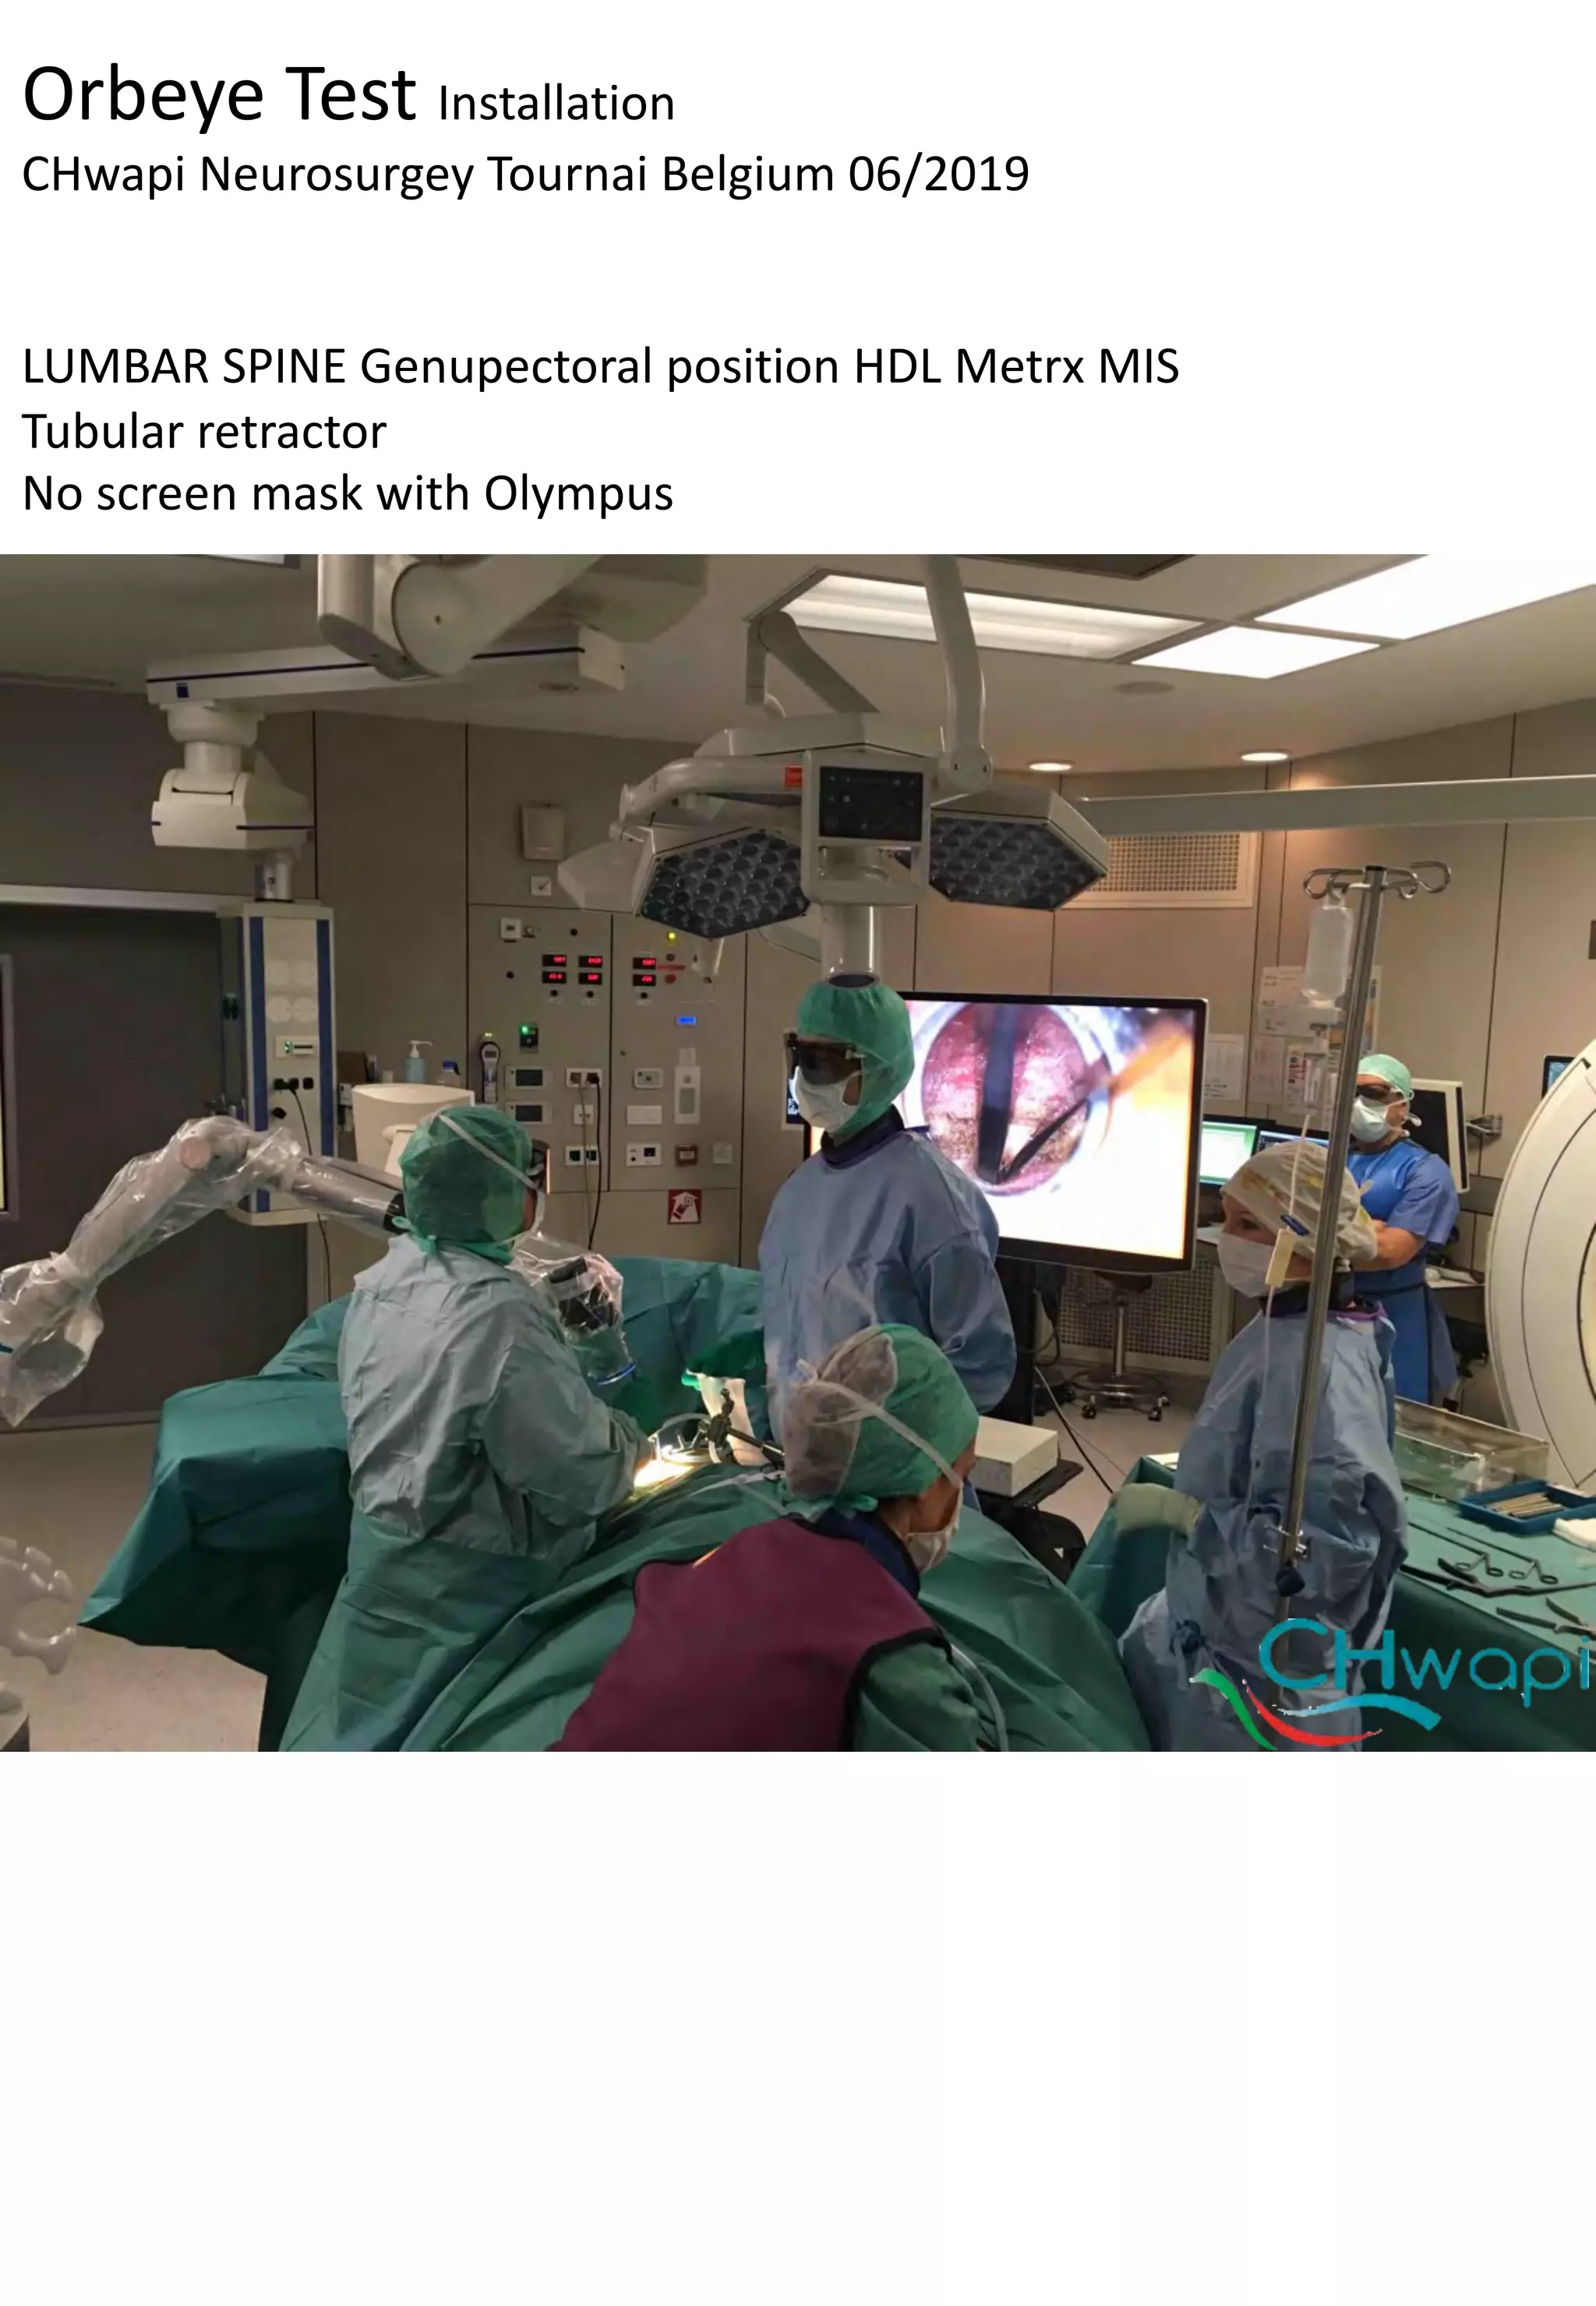 Microsurgery without eyepieces 3D screen heads-up position